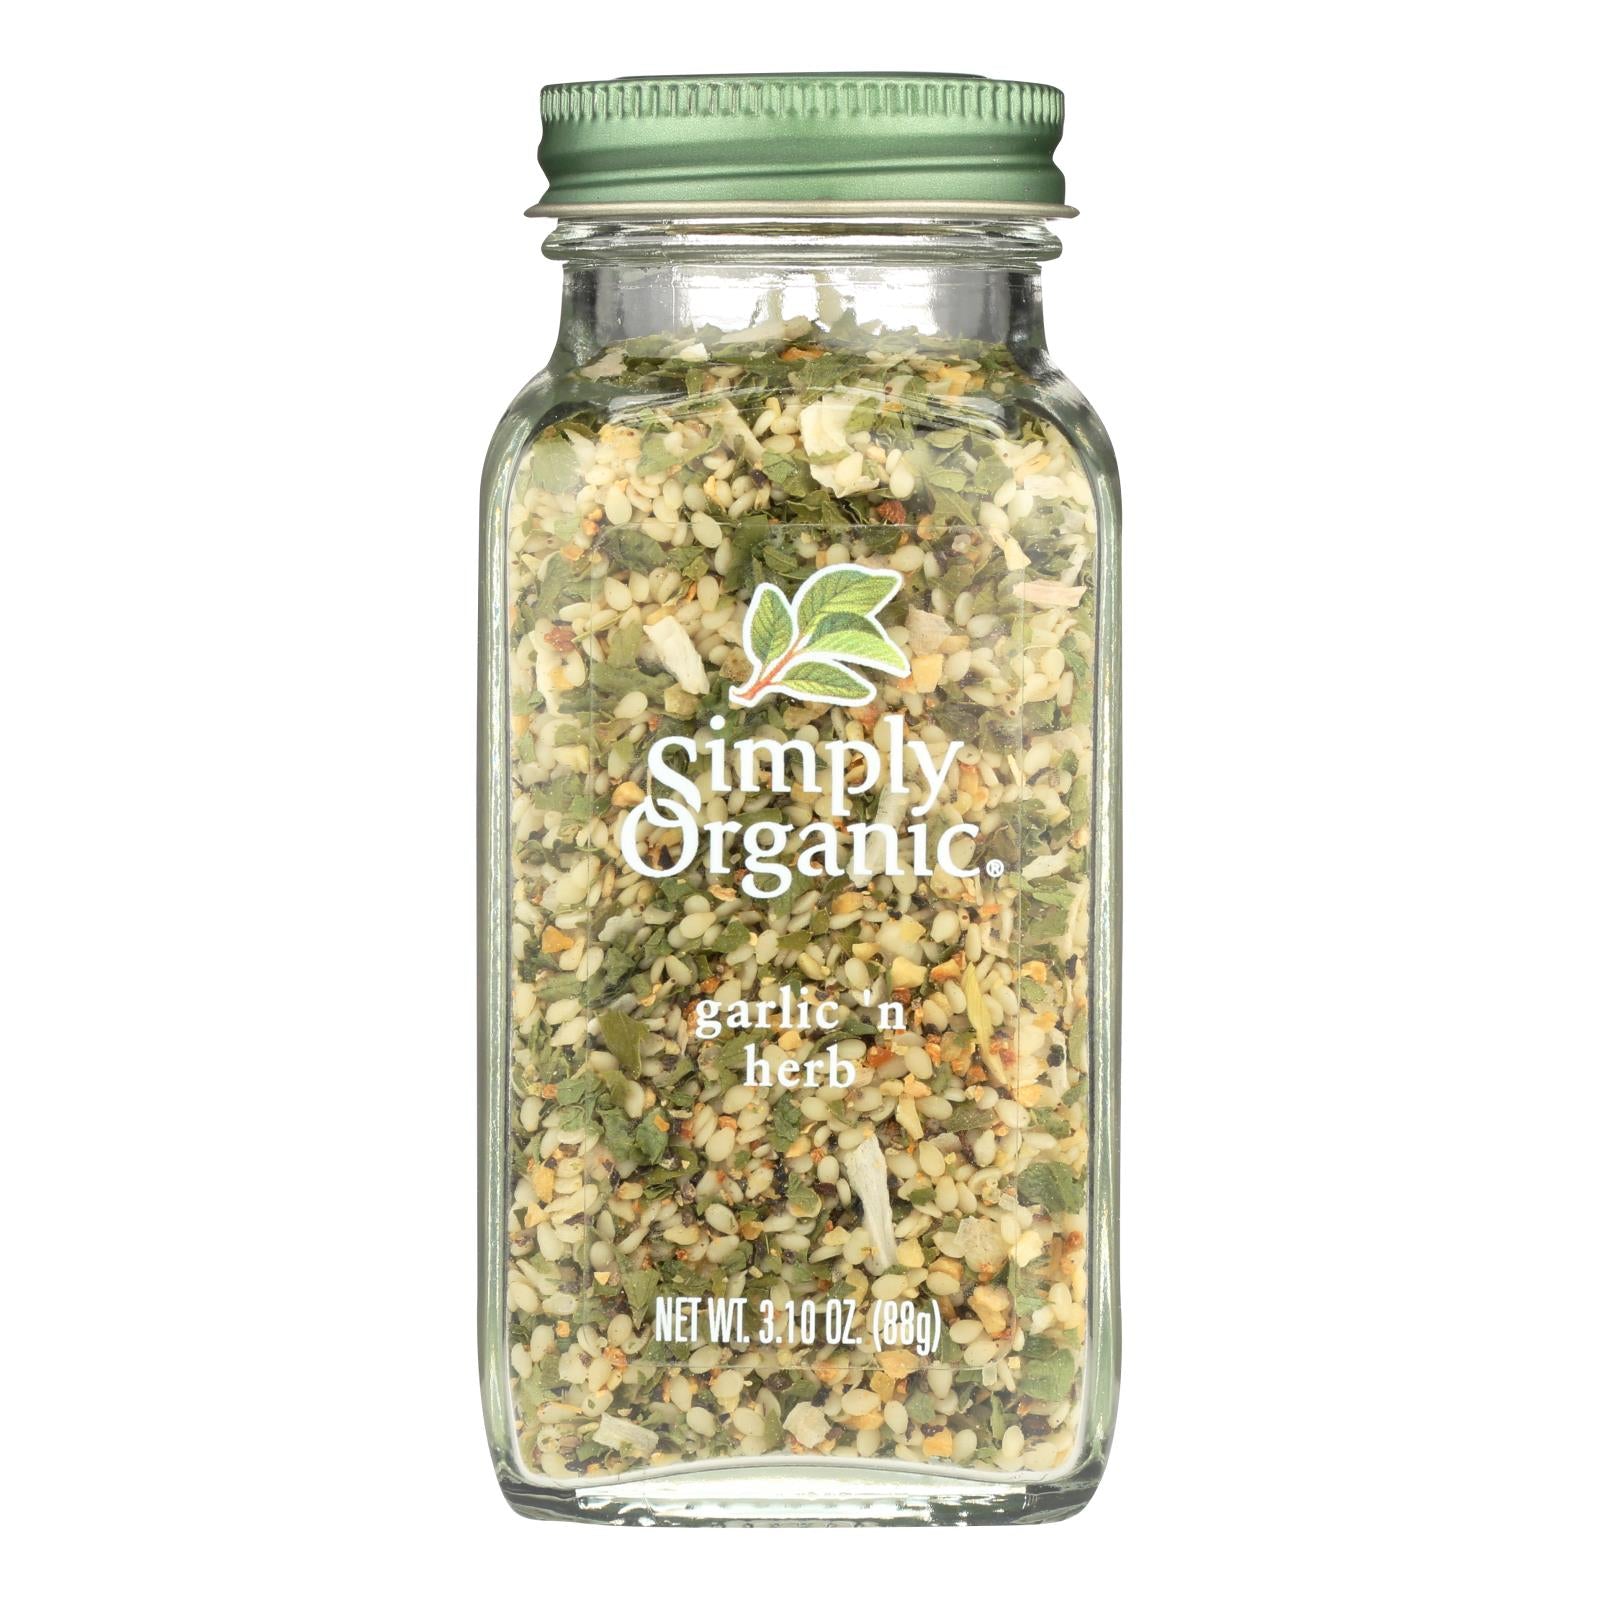 Simply Organic - Garlic and Herb Organic - Case of 6 - 3.10 Ounces